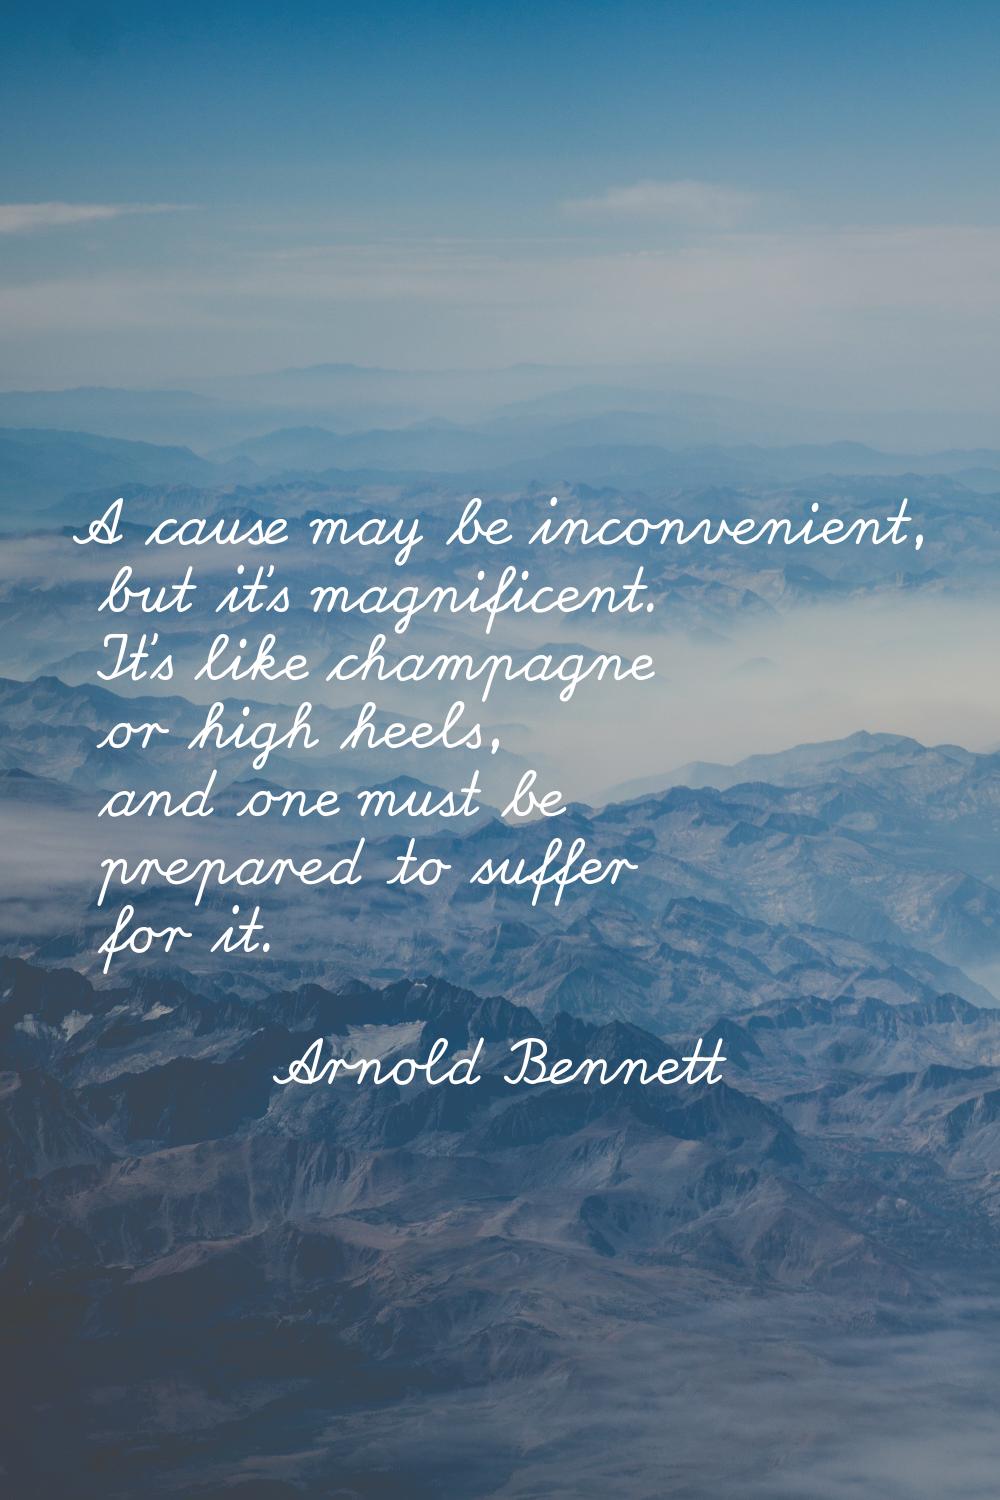 A cause may be inconvenient, but it's magnificent. It's like champagne or high heels, and one must 